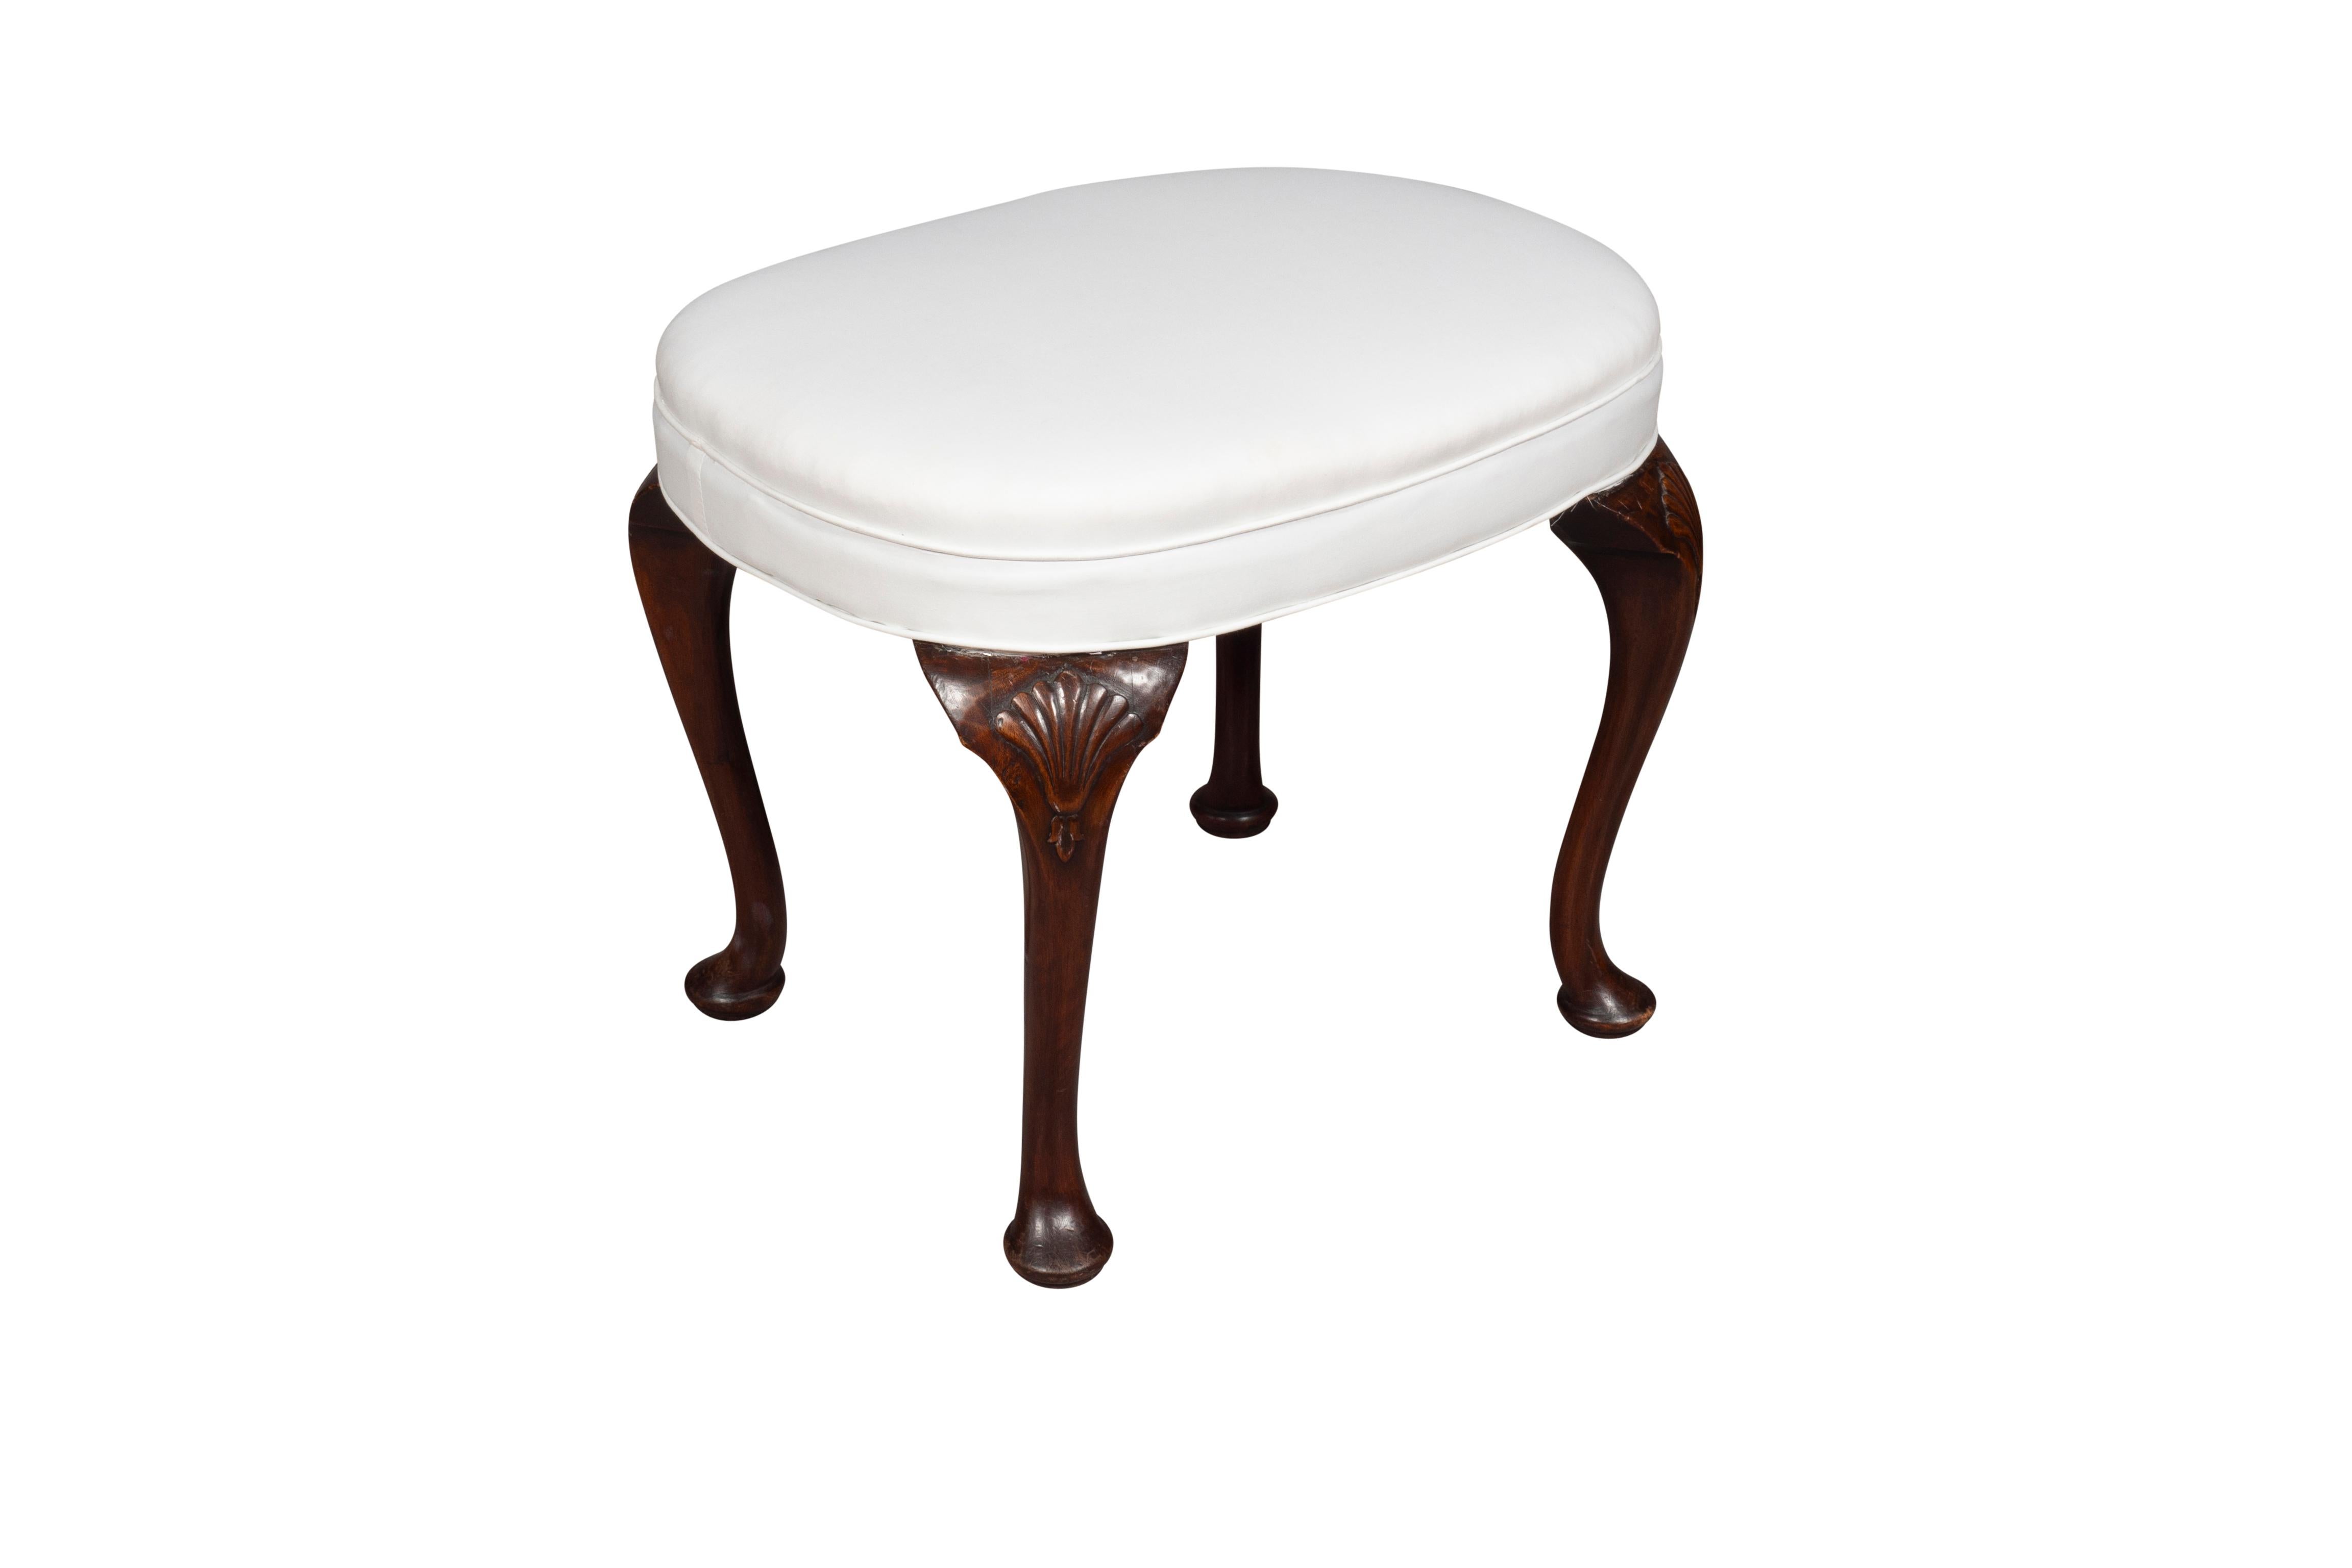 Oval seat with new muslin covering. Raised on cabriole legs with shell knees. Pad feet. Ex William Hodgins. Boston.